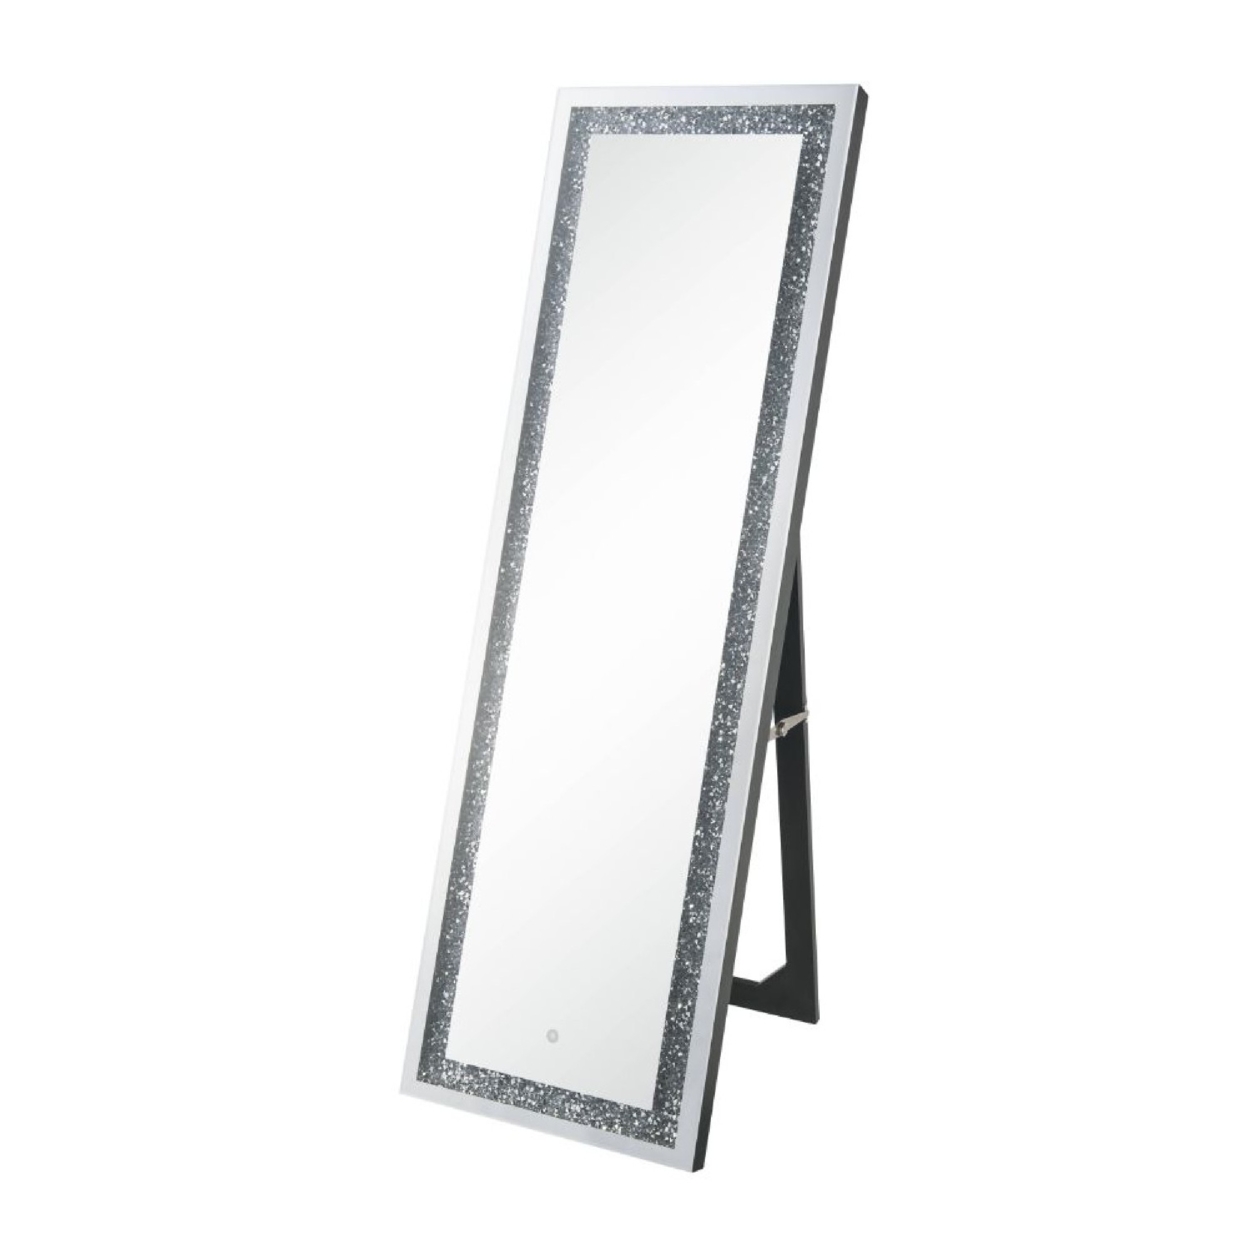 Floor Mirror With LED Light And Faux Diamonds Inlay, Silver- Saltoro Sherpi